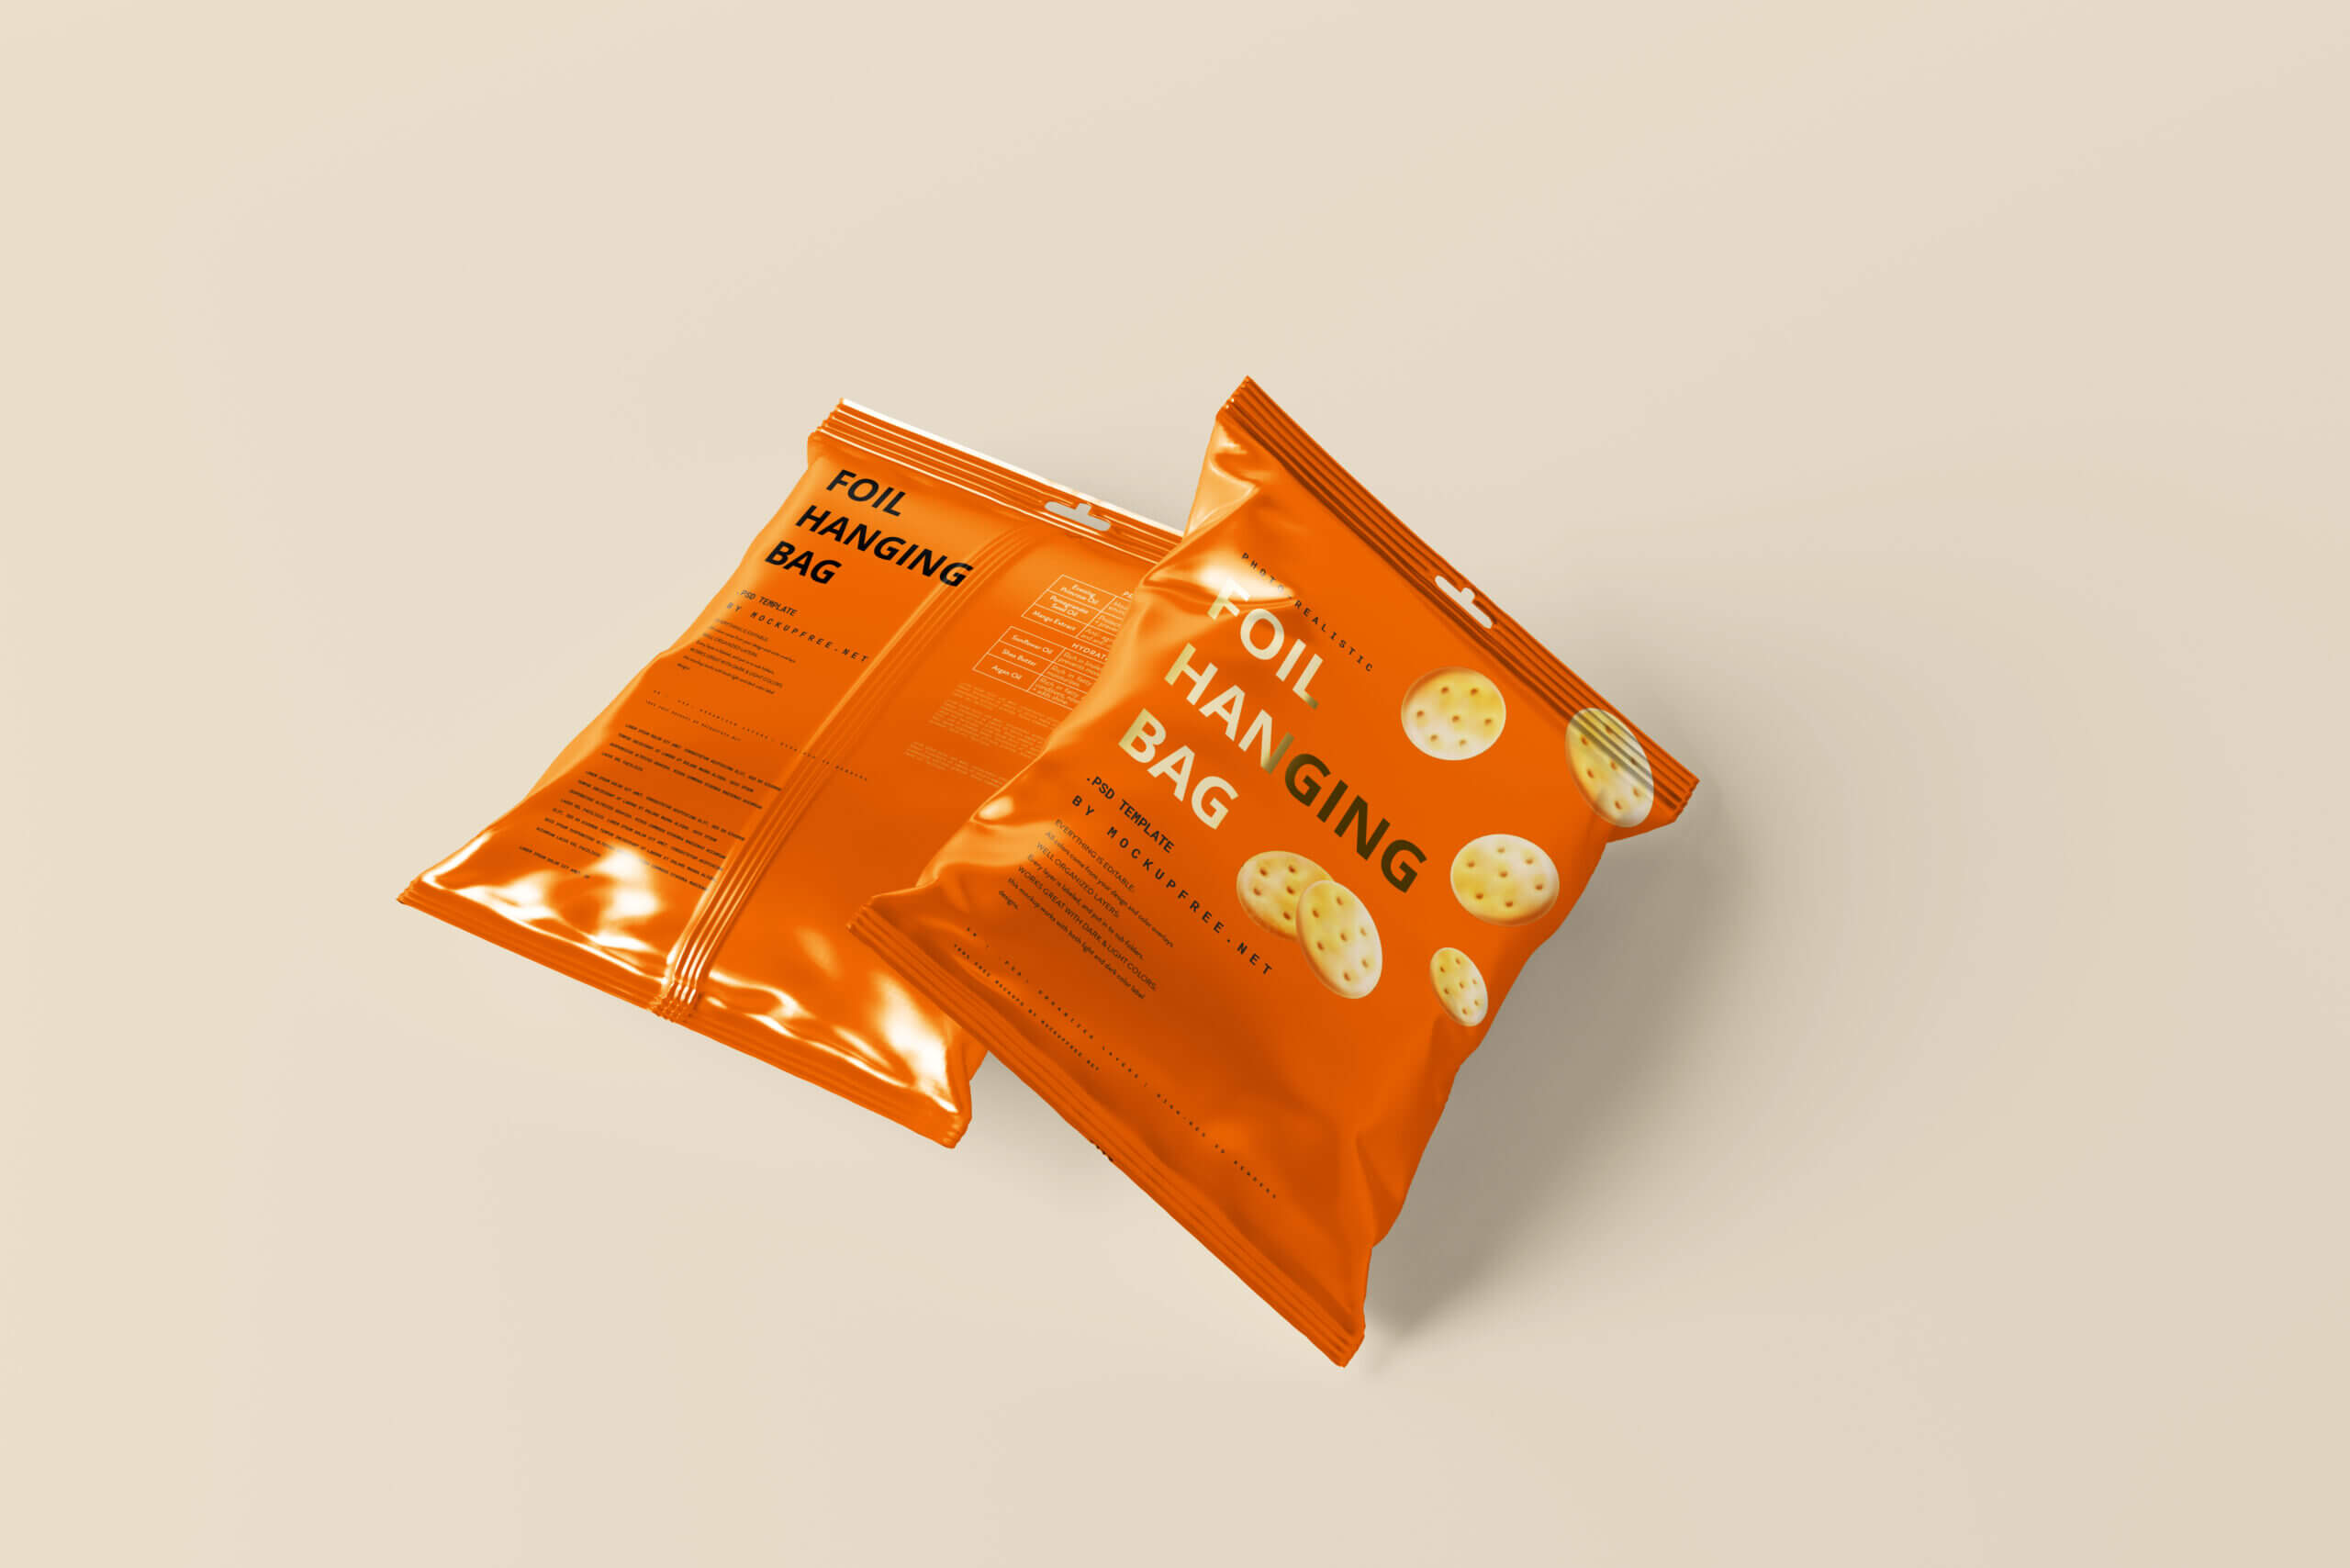 Hanging Snack Bag and Chips Foil Packet Mockups 10 different view9